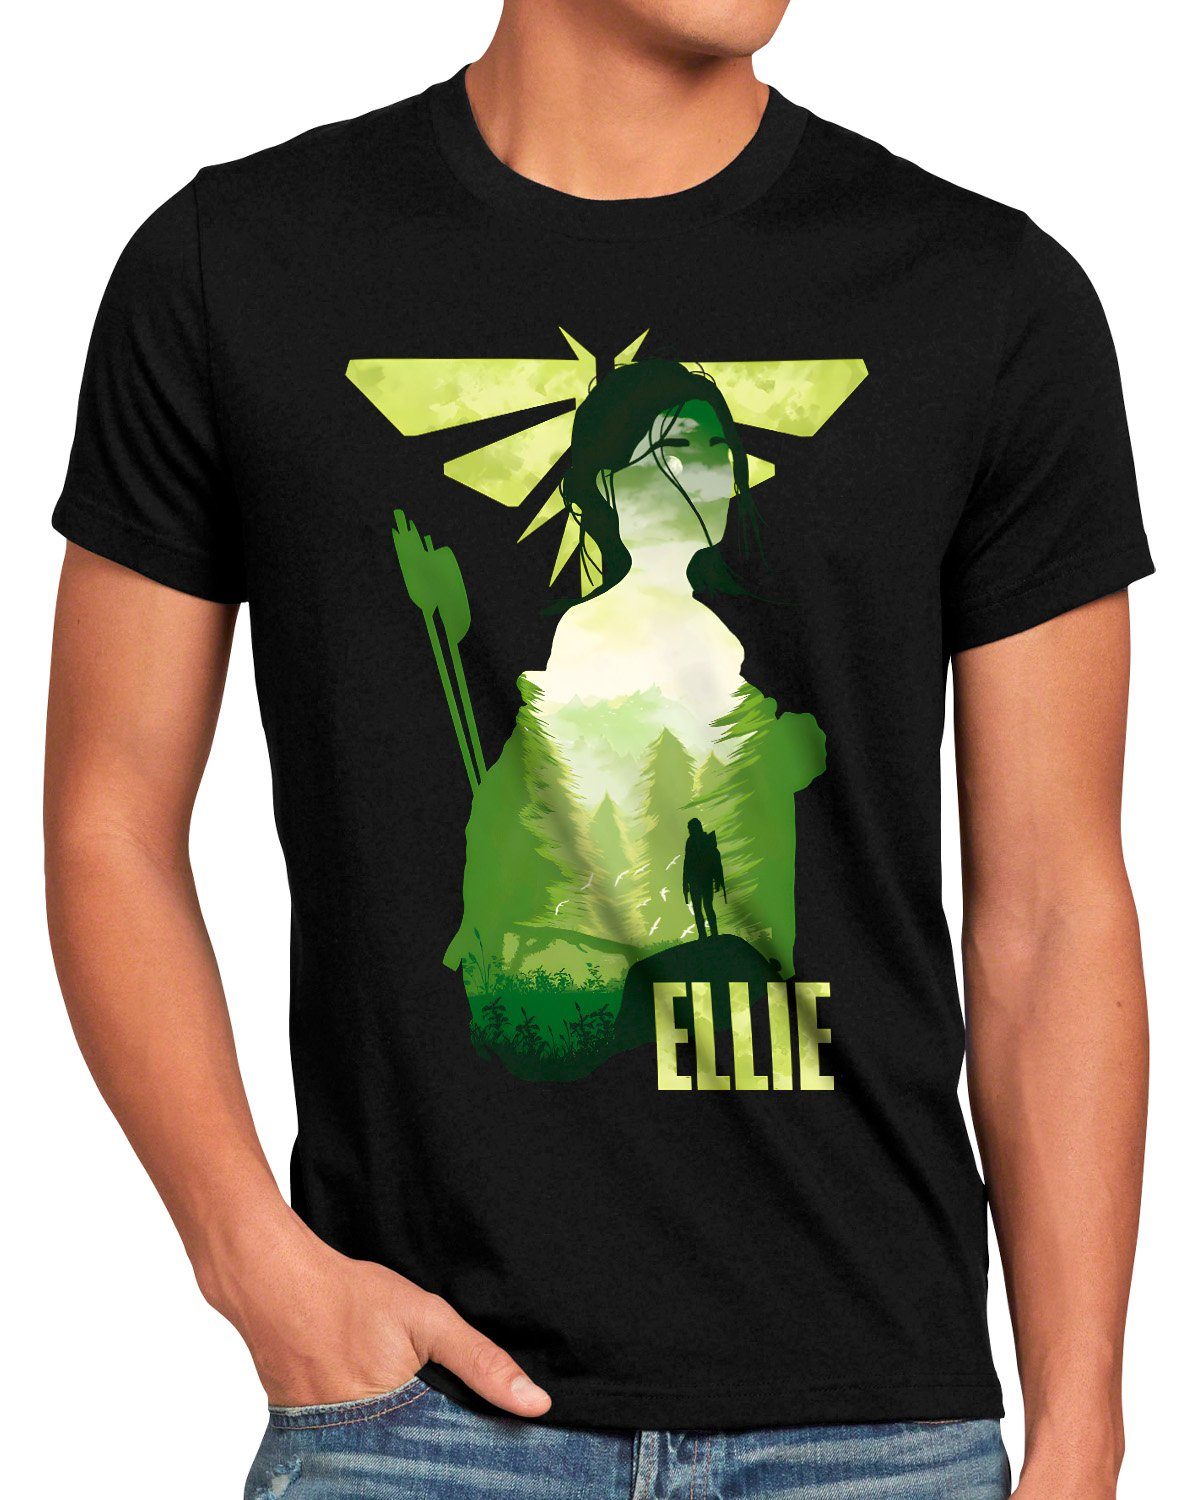 Cure ps5 of style3 T-Shirt Ellie last for ps4 tv us the Print-Shirt videospiel Herren